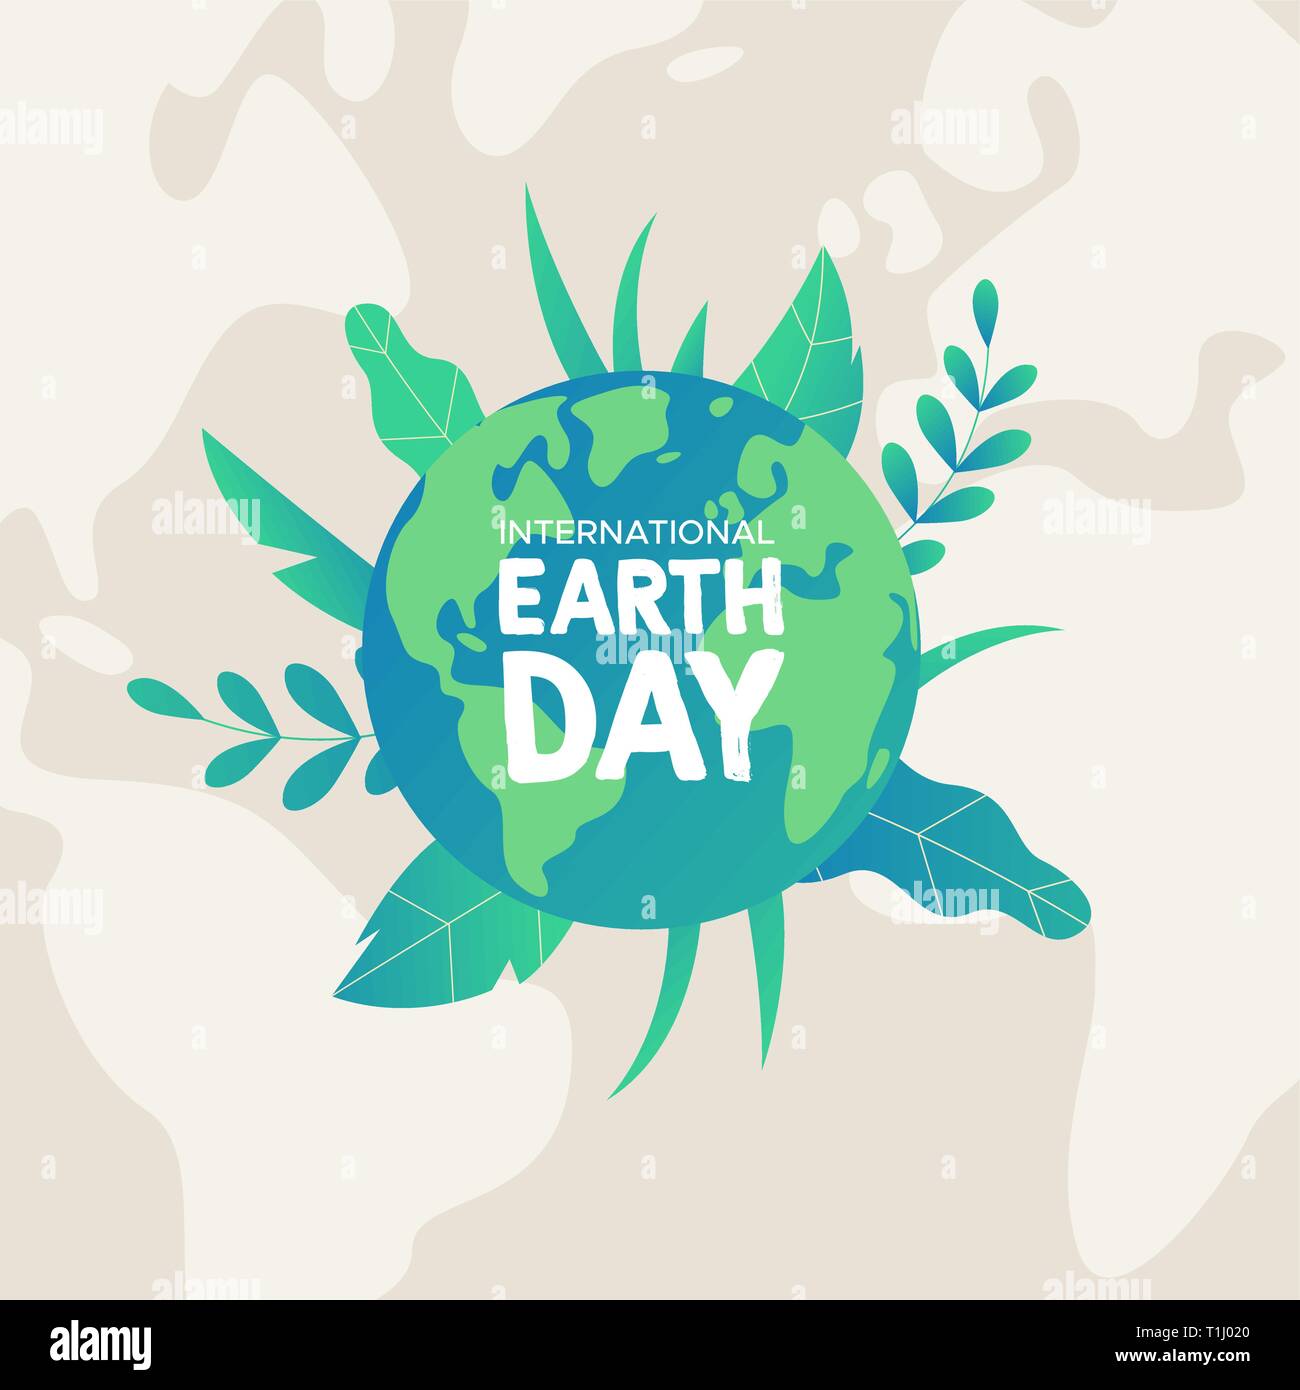 International Earth Day illustration. Green planet with tropical plant leaves for nature care and environment help. Stock Vector